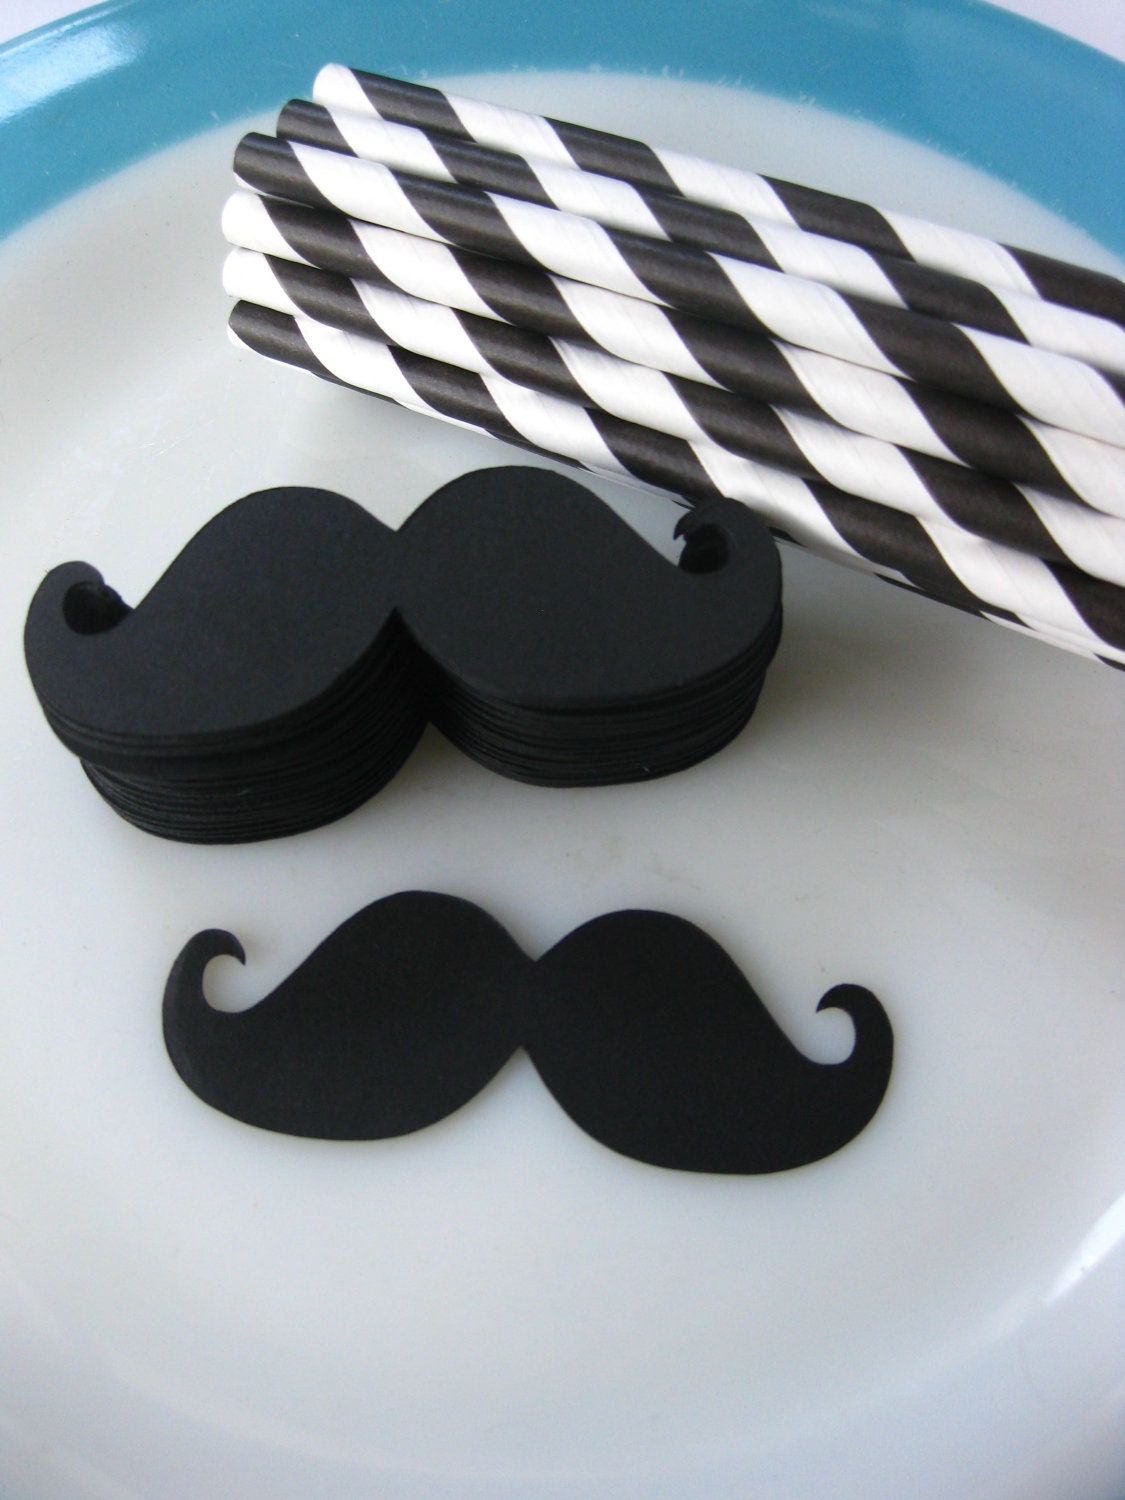 DIY Imperial Mustache Straw Kit 25 Paper Straws Photo Prop